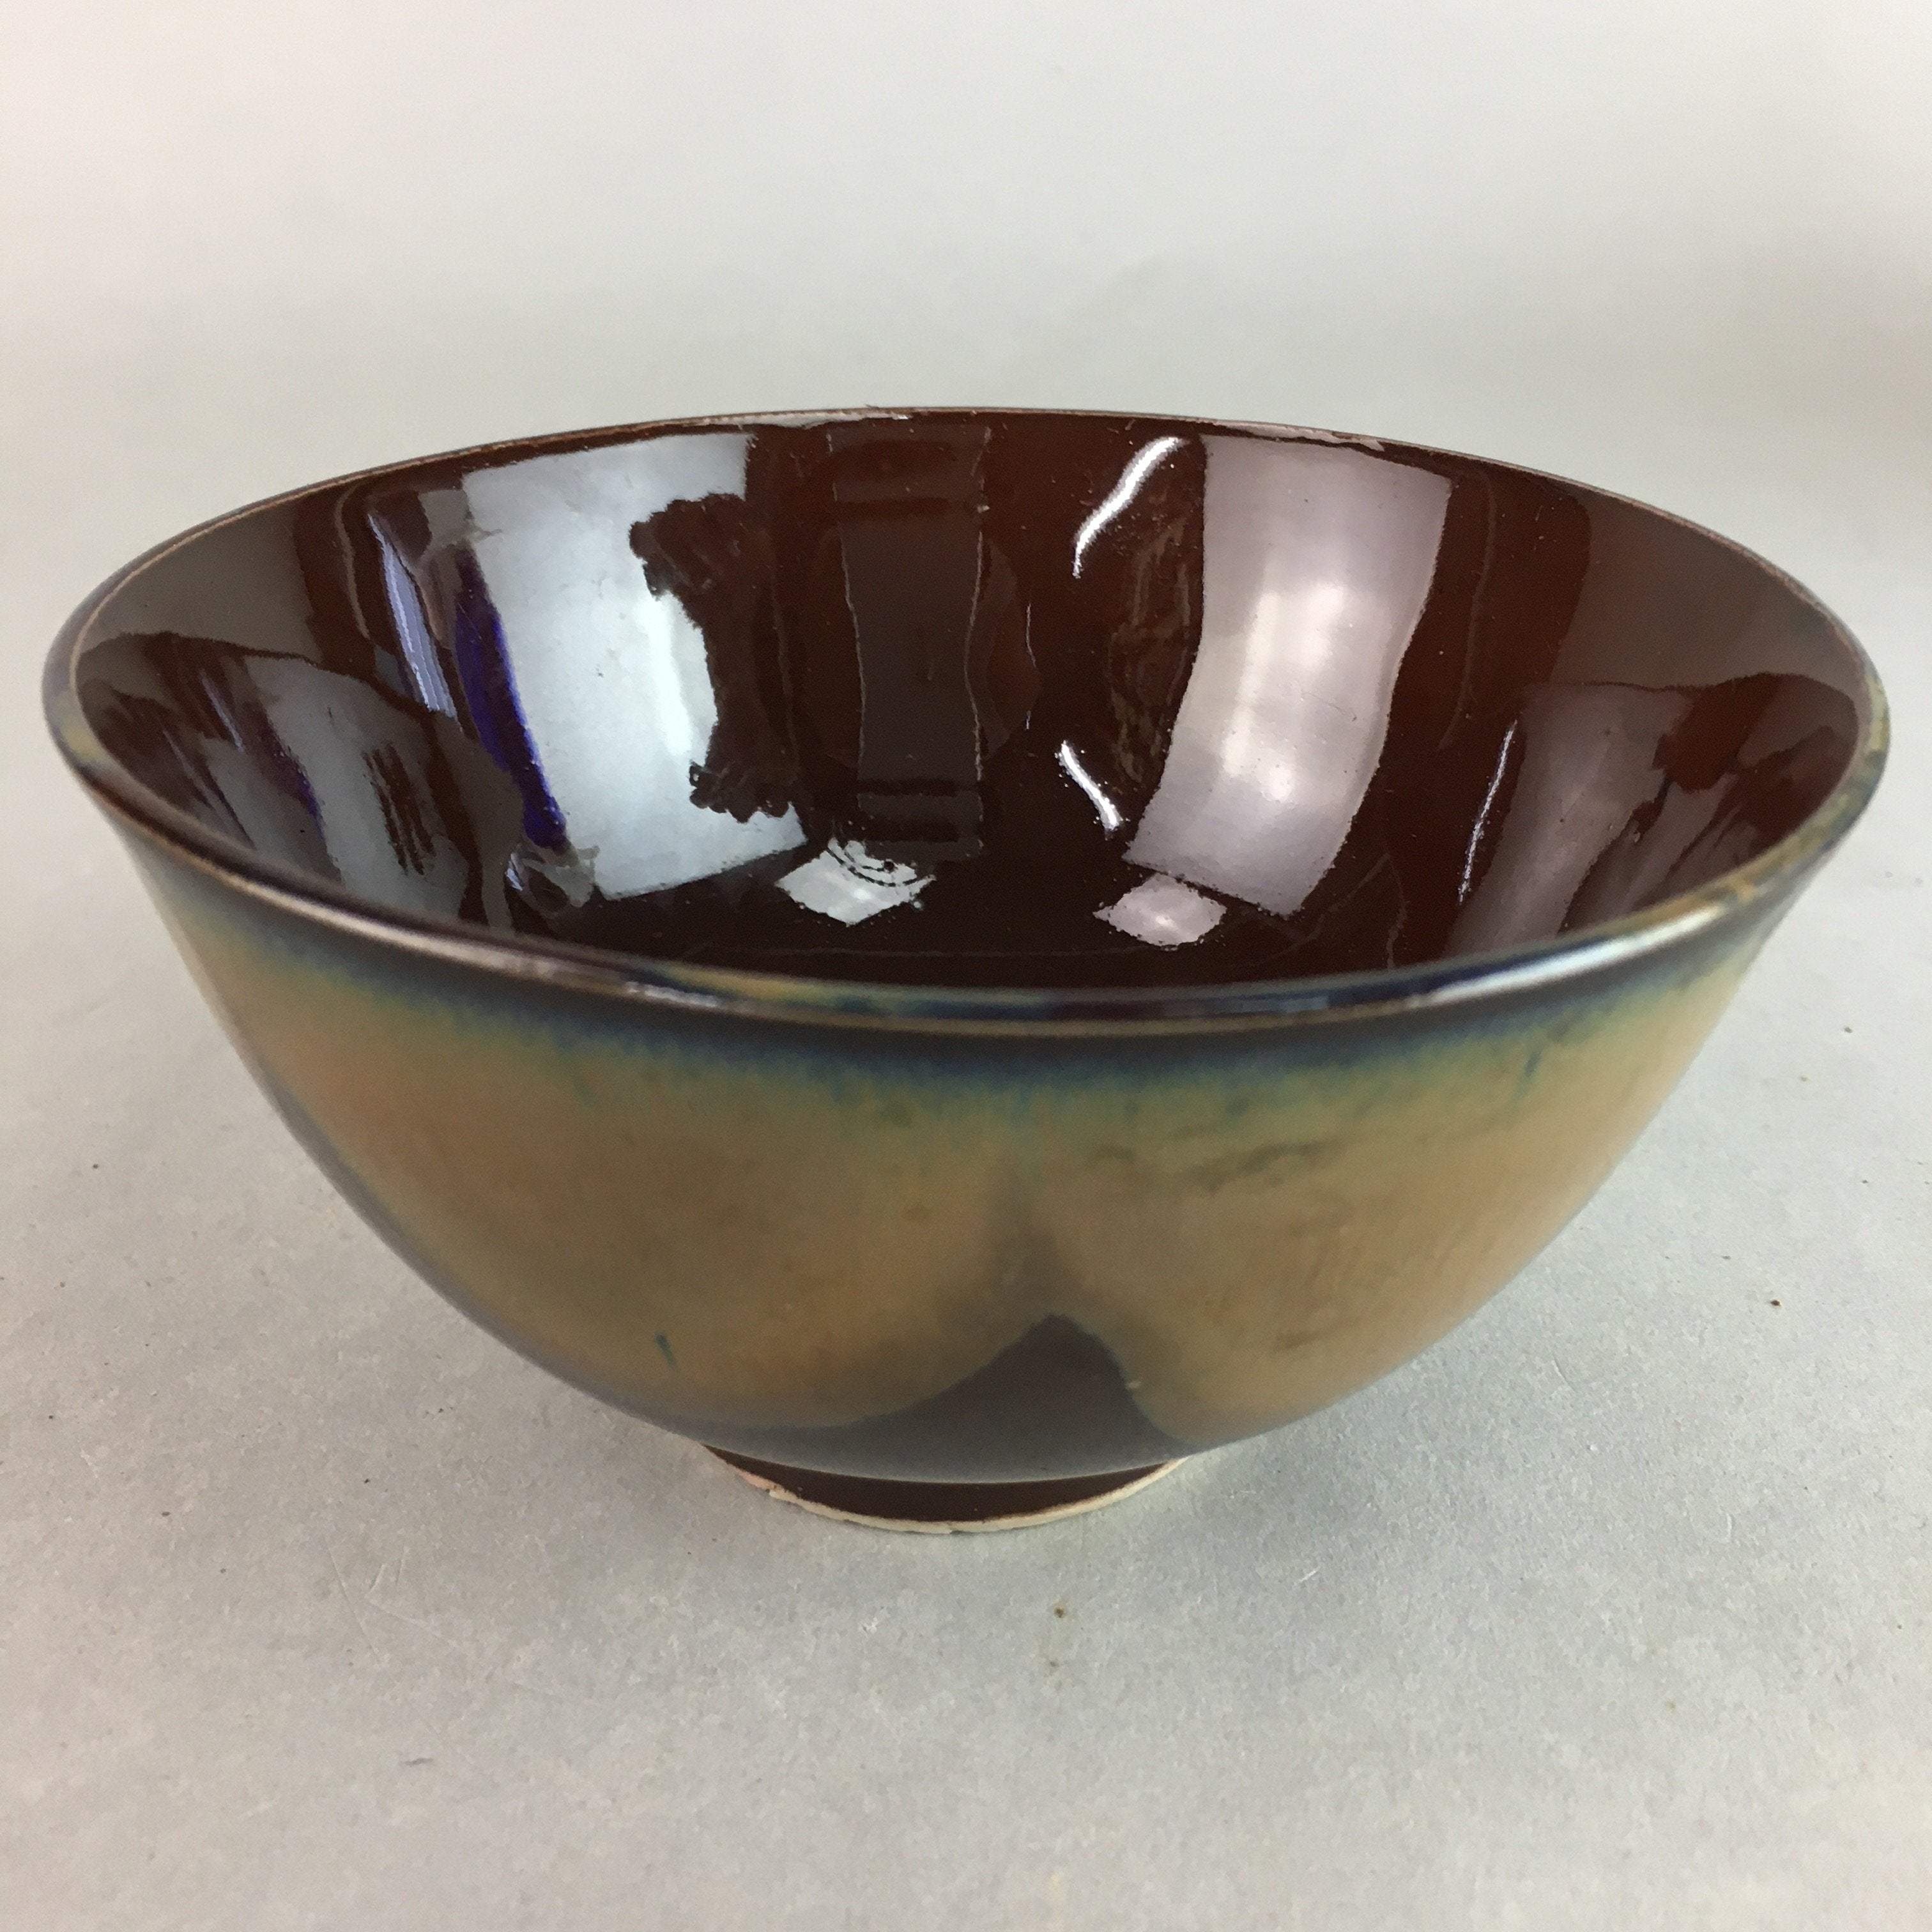 Japanese Porcelain Rice Bowl Vtg Chawan Brown Shiny Smooth Flowing Glaze PP306